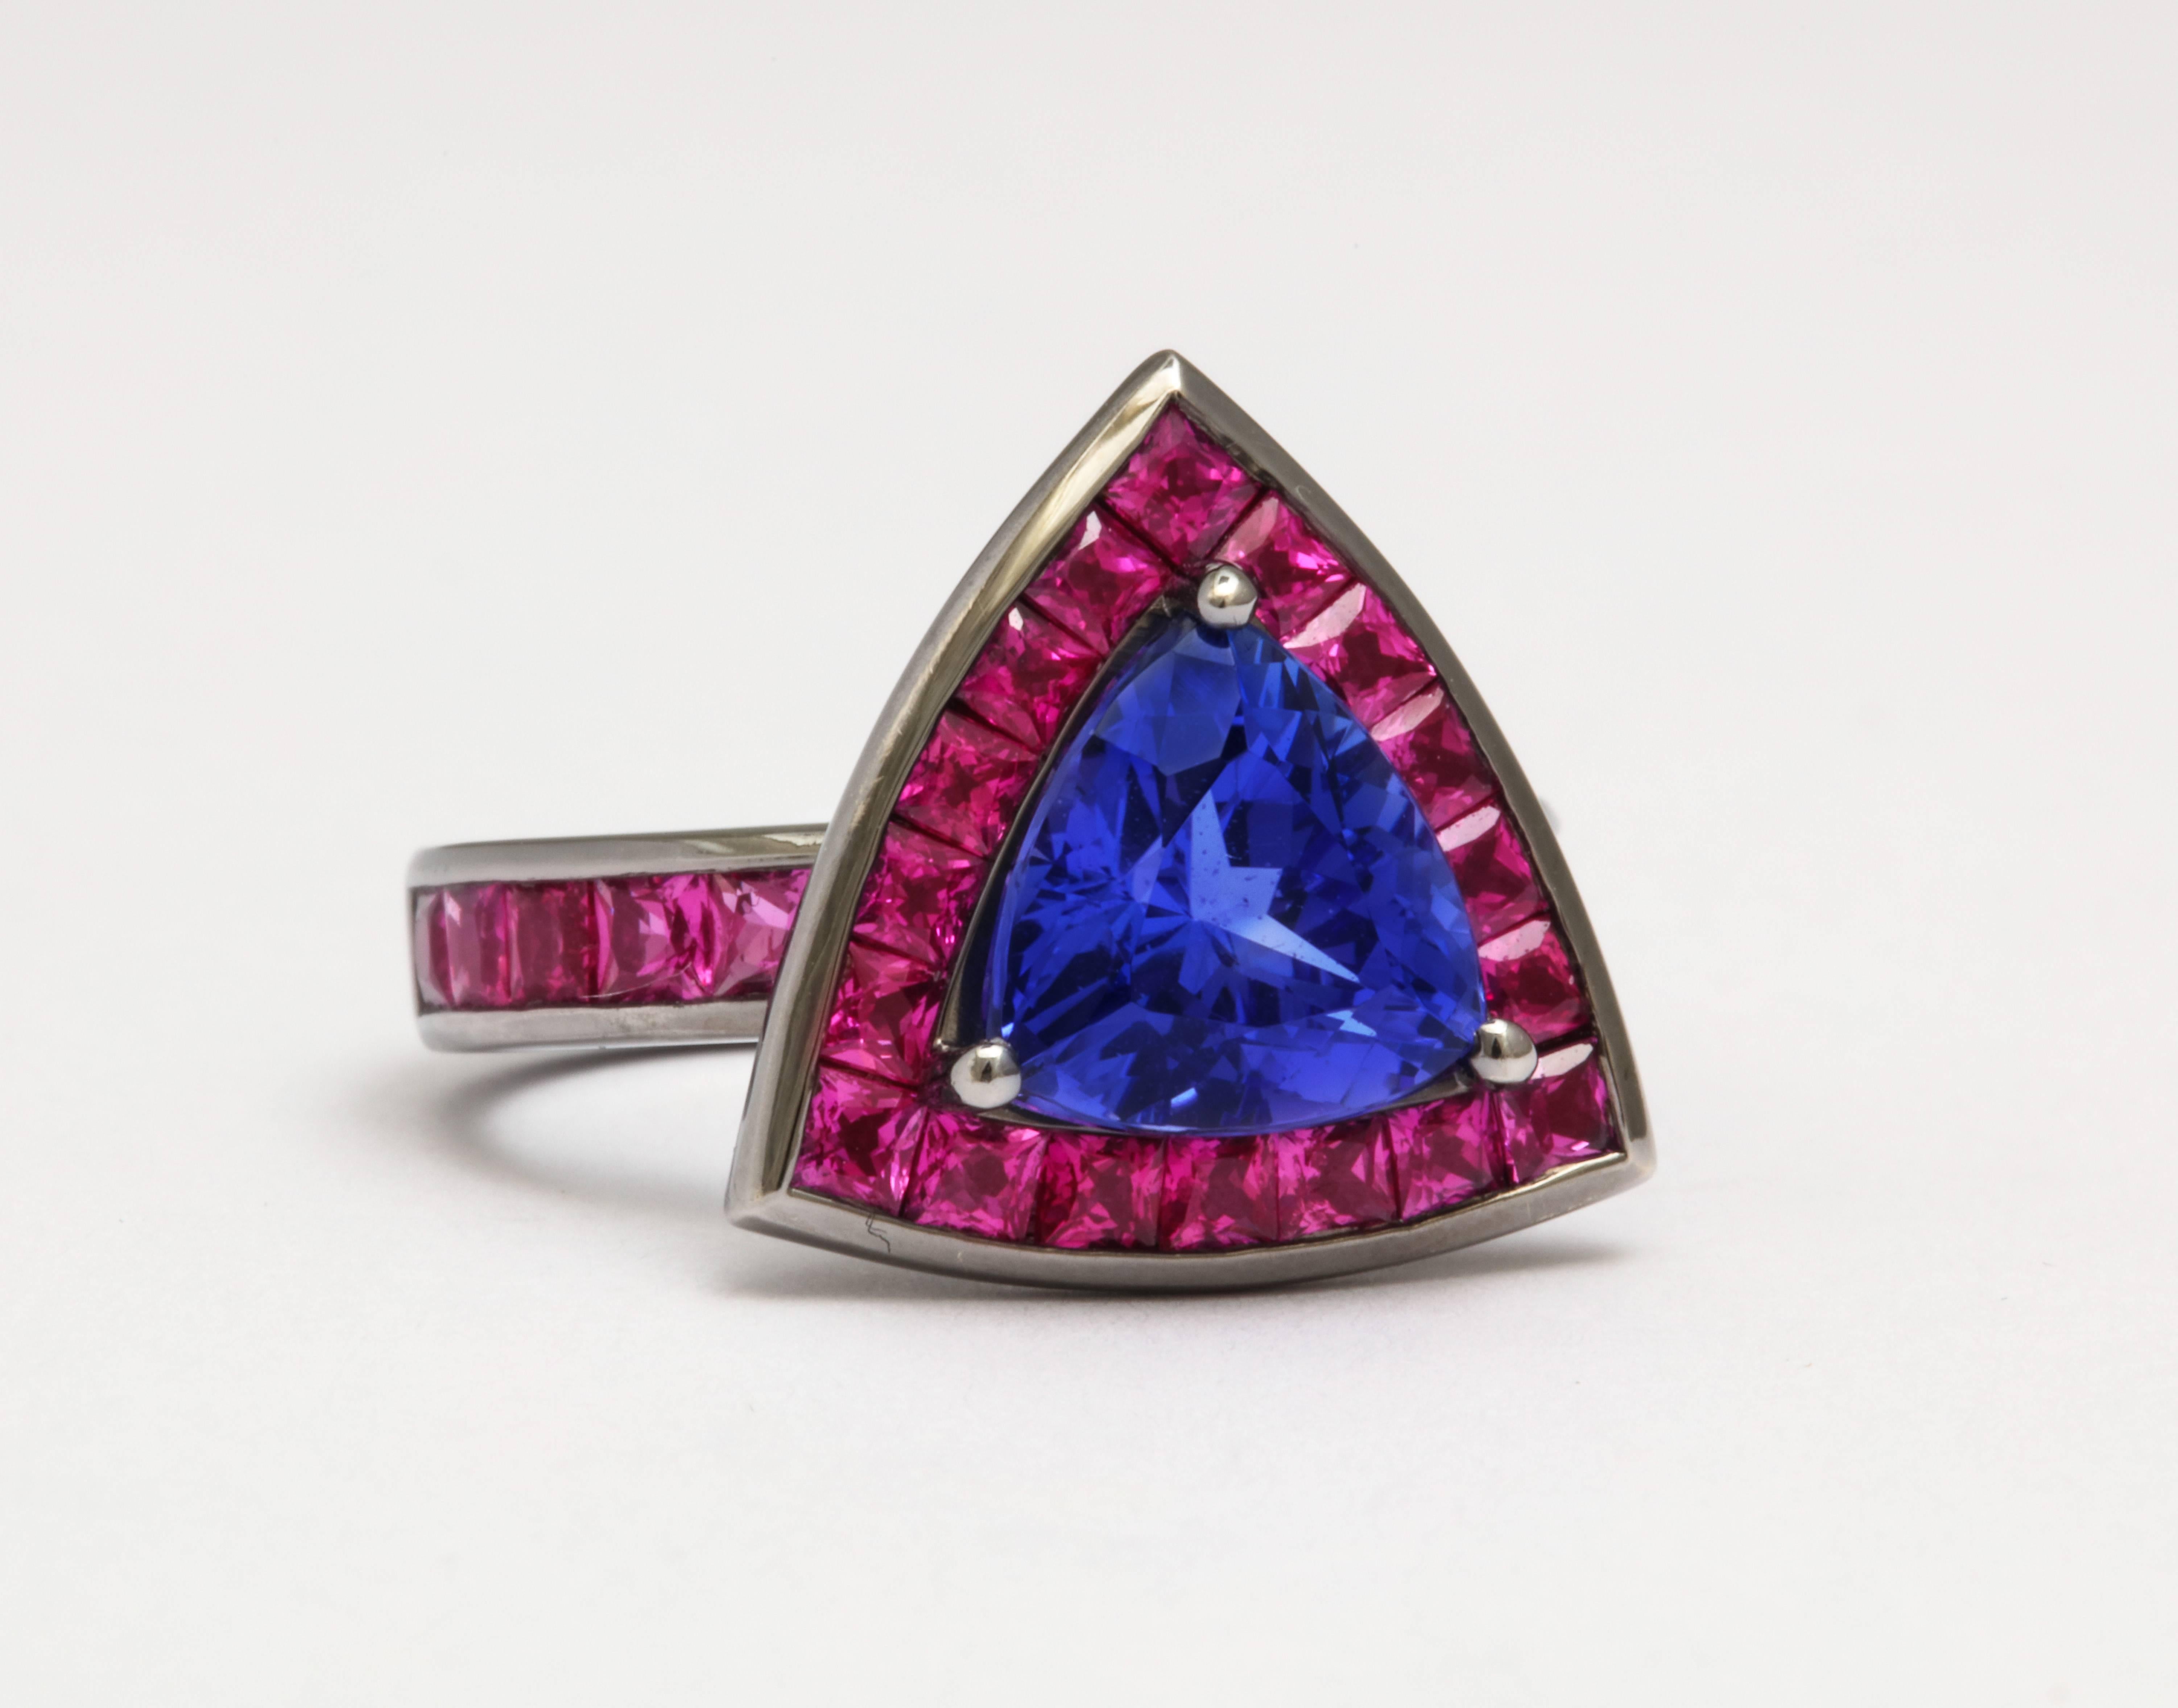 Dramatic and colorful 18 karat gold ring features a triangle cut tanzanite weighing 2.91 carats surrounded by 18 hot pink princess cut sapphires in a channel-set halo. Additional princess cut vivid pink sapphires are channel-set in the shank of this